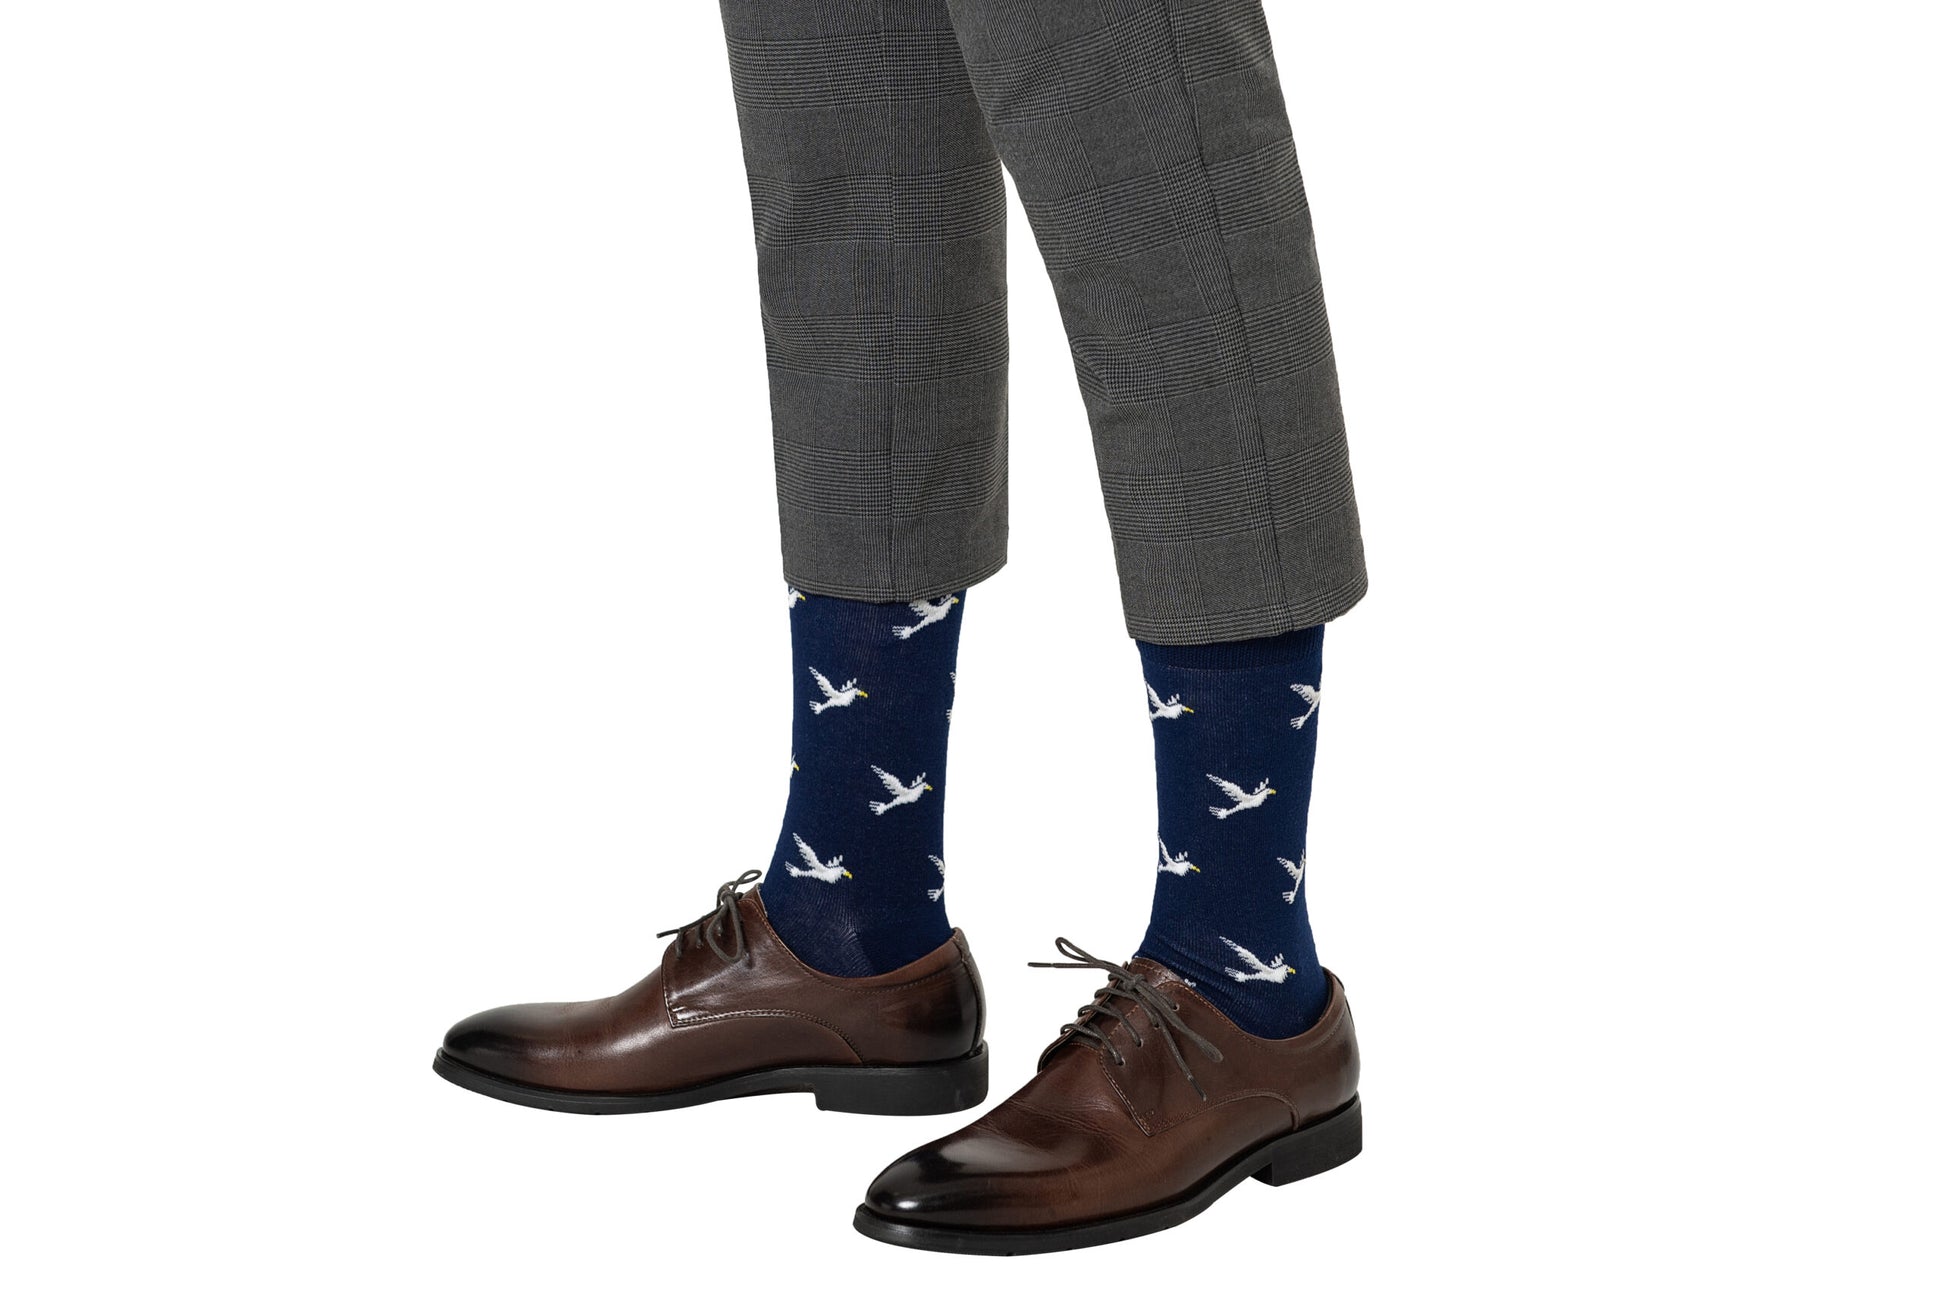 A man wearing a pair of Dove Socks with birds on them.